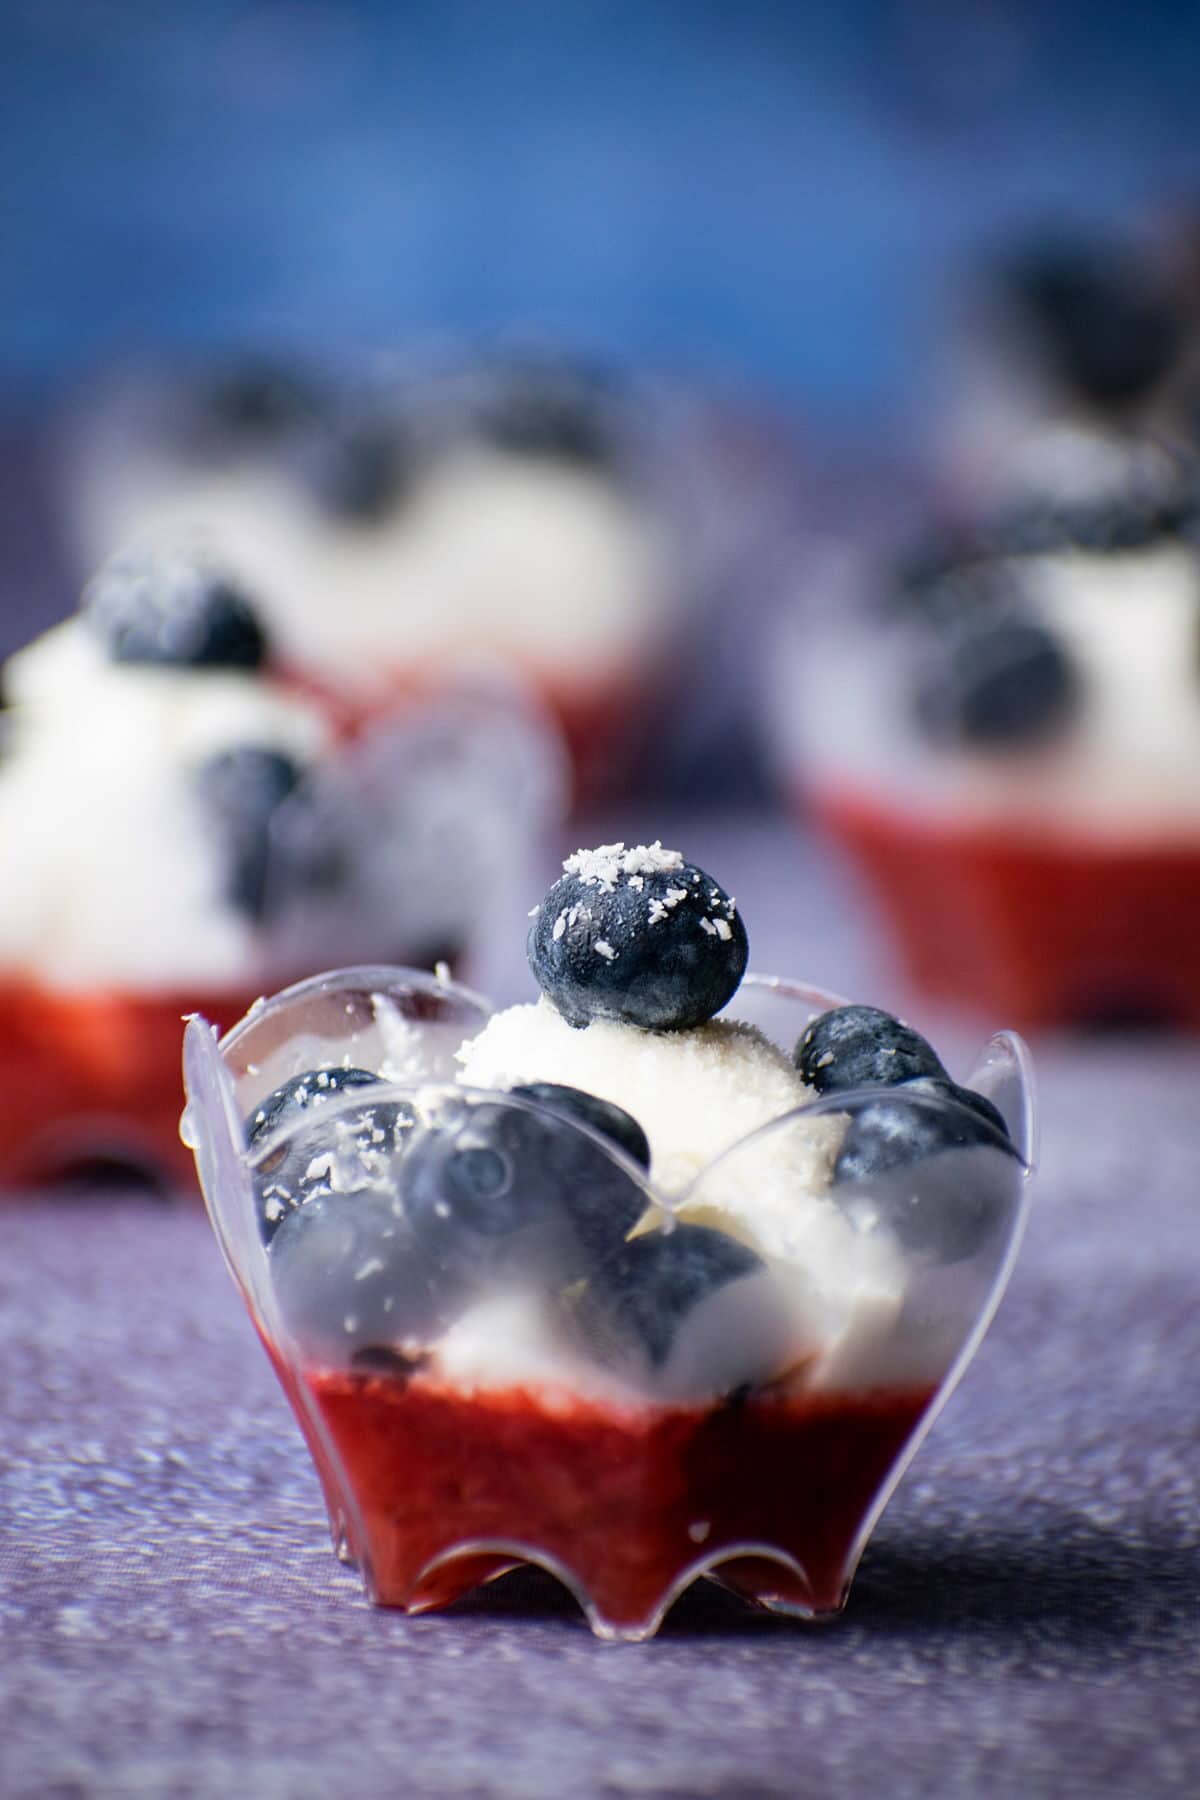 Mini fruit and ice cream treat in a dessert cup, with blue background.